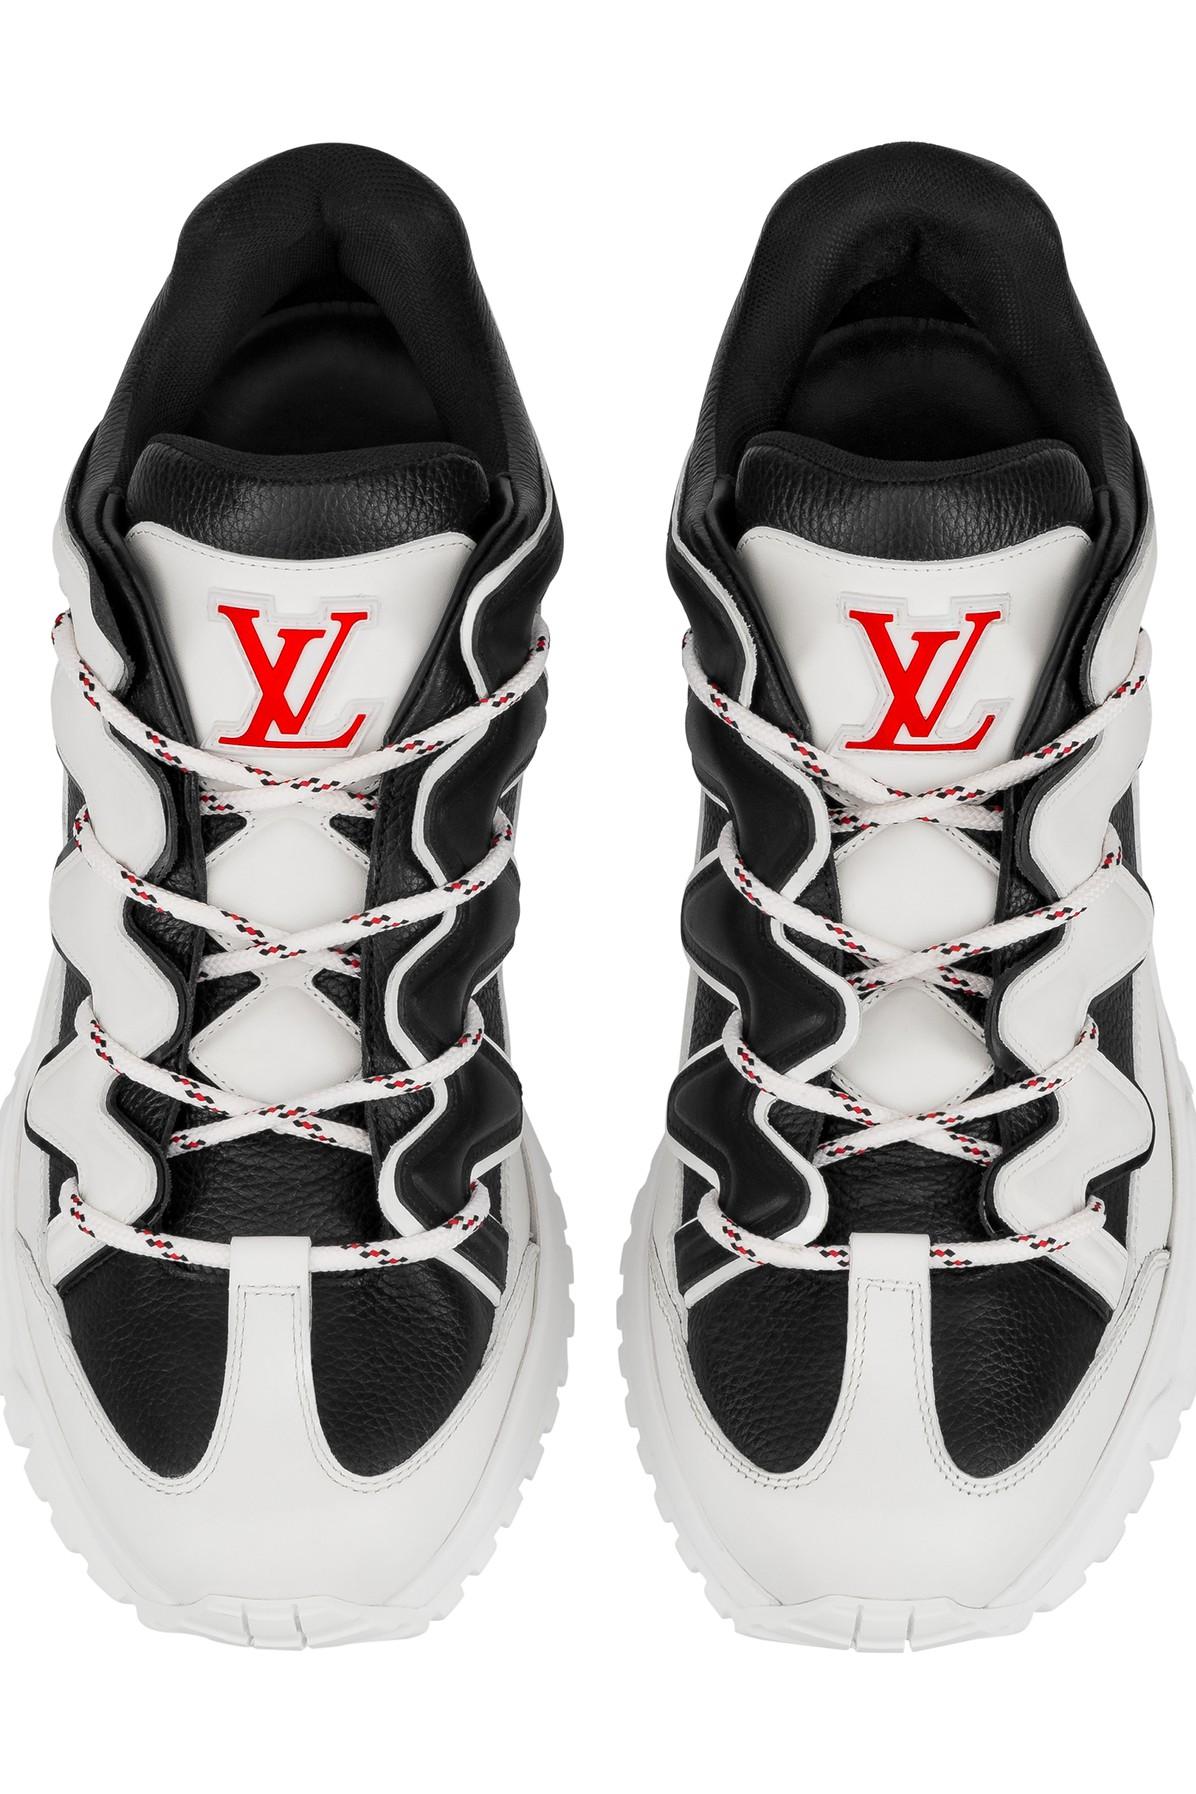 Louis Vuitton Zig zag Leather Sneakers White Red Black Mens US 9